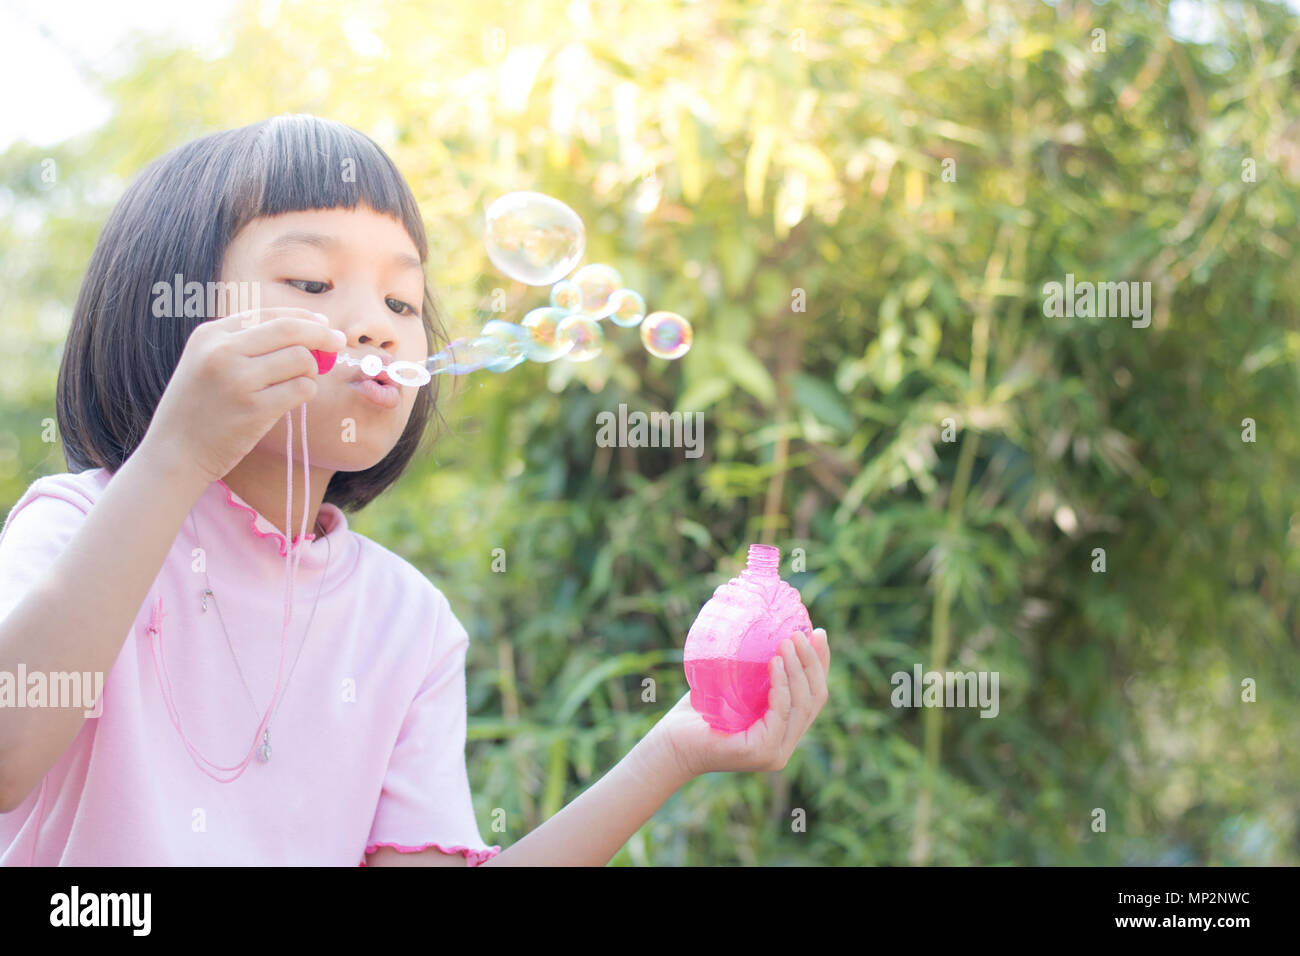 funny young girl blow bubbles in green garden Stock Photo